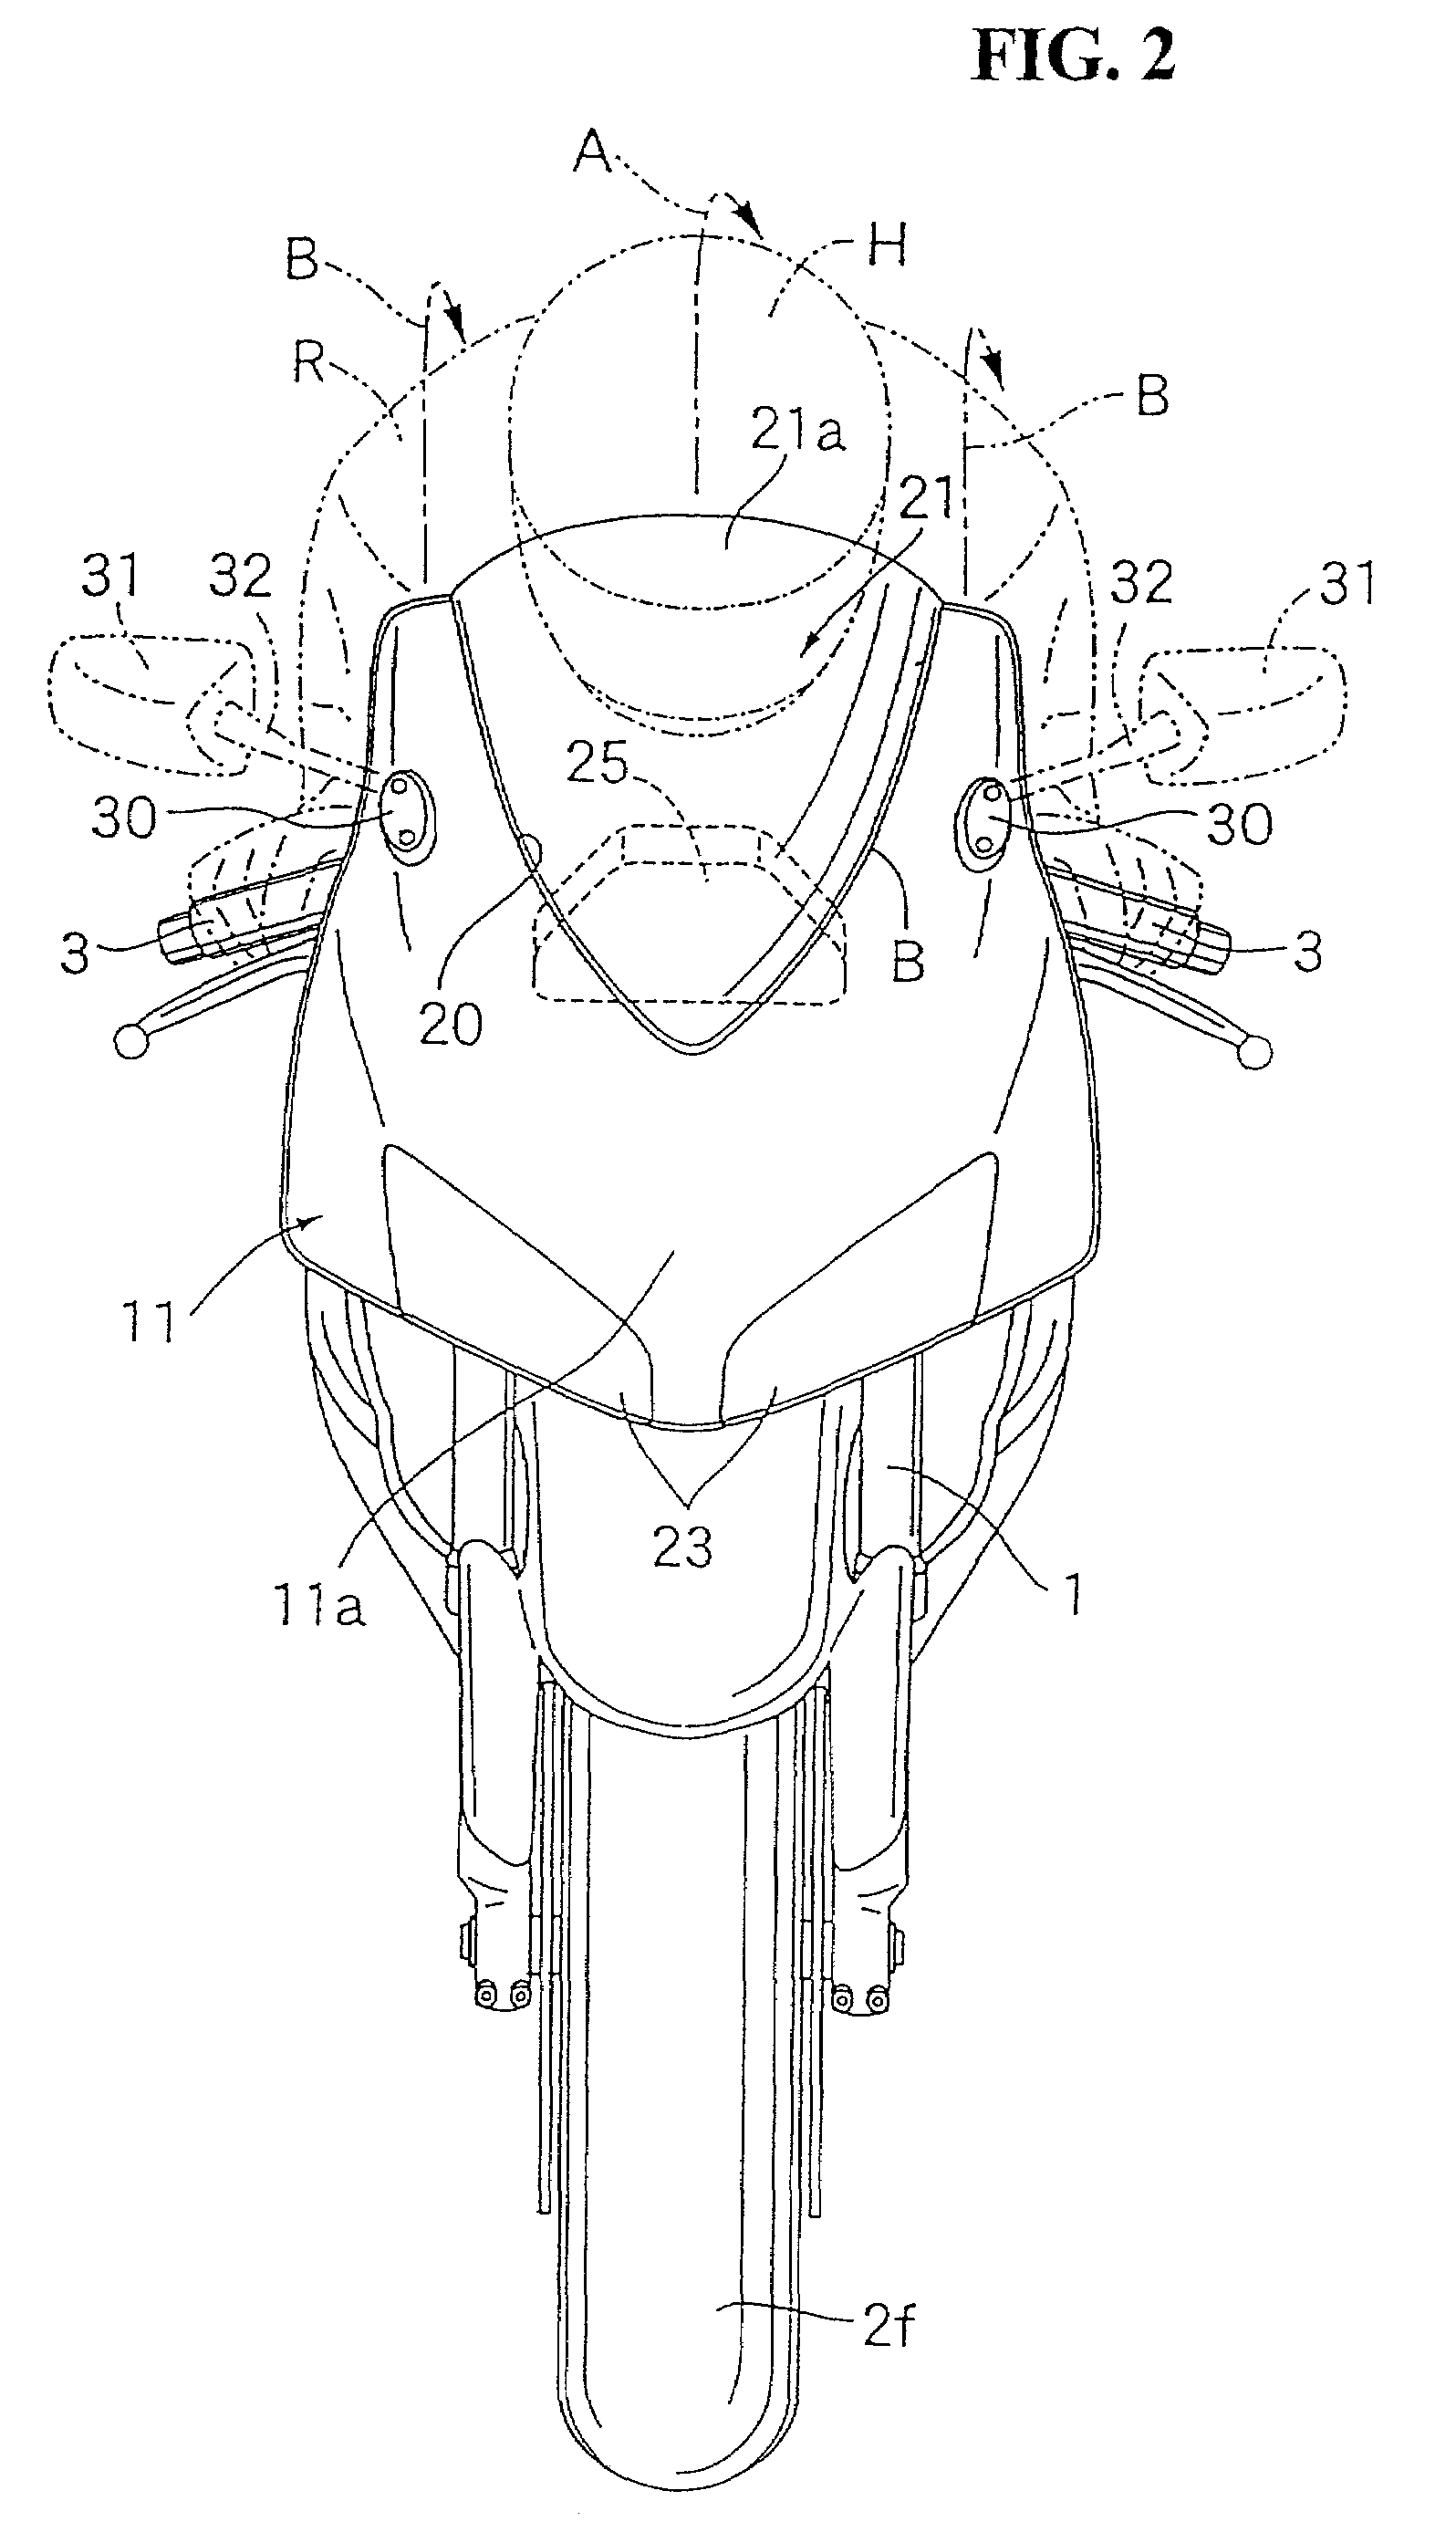 Arrangement structure of upper cowl, screen, and meter for motorcycles